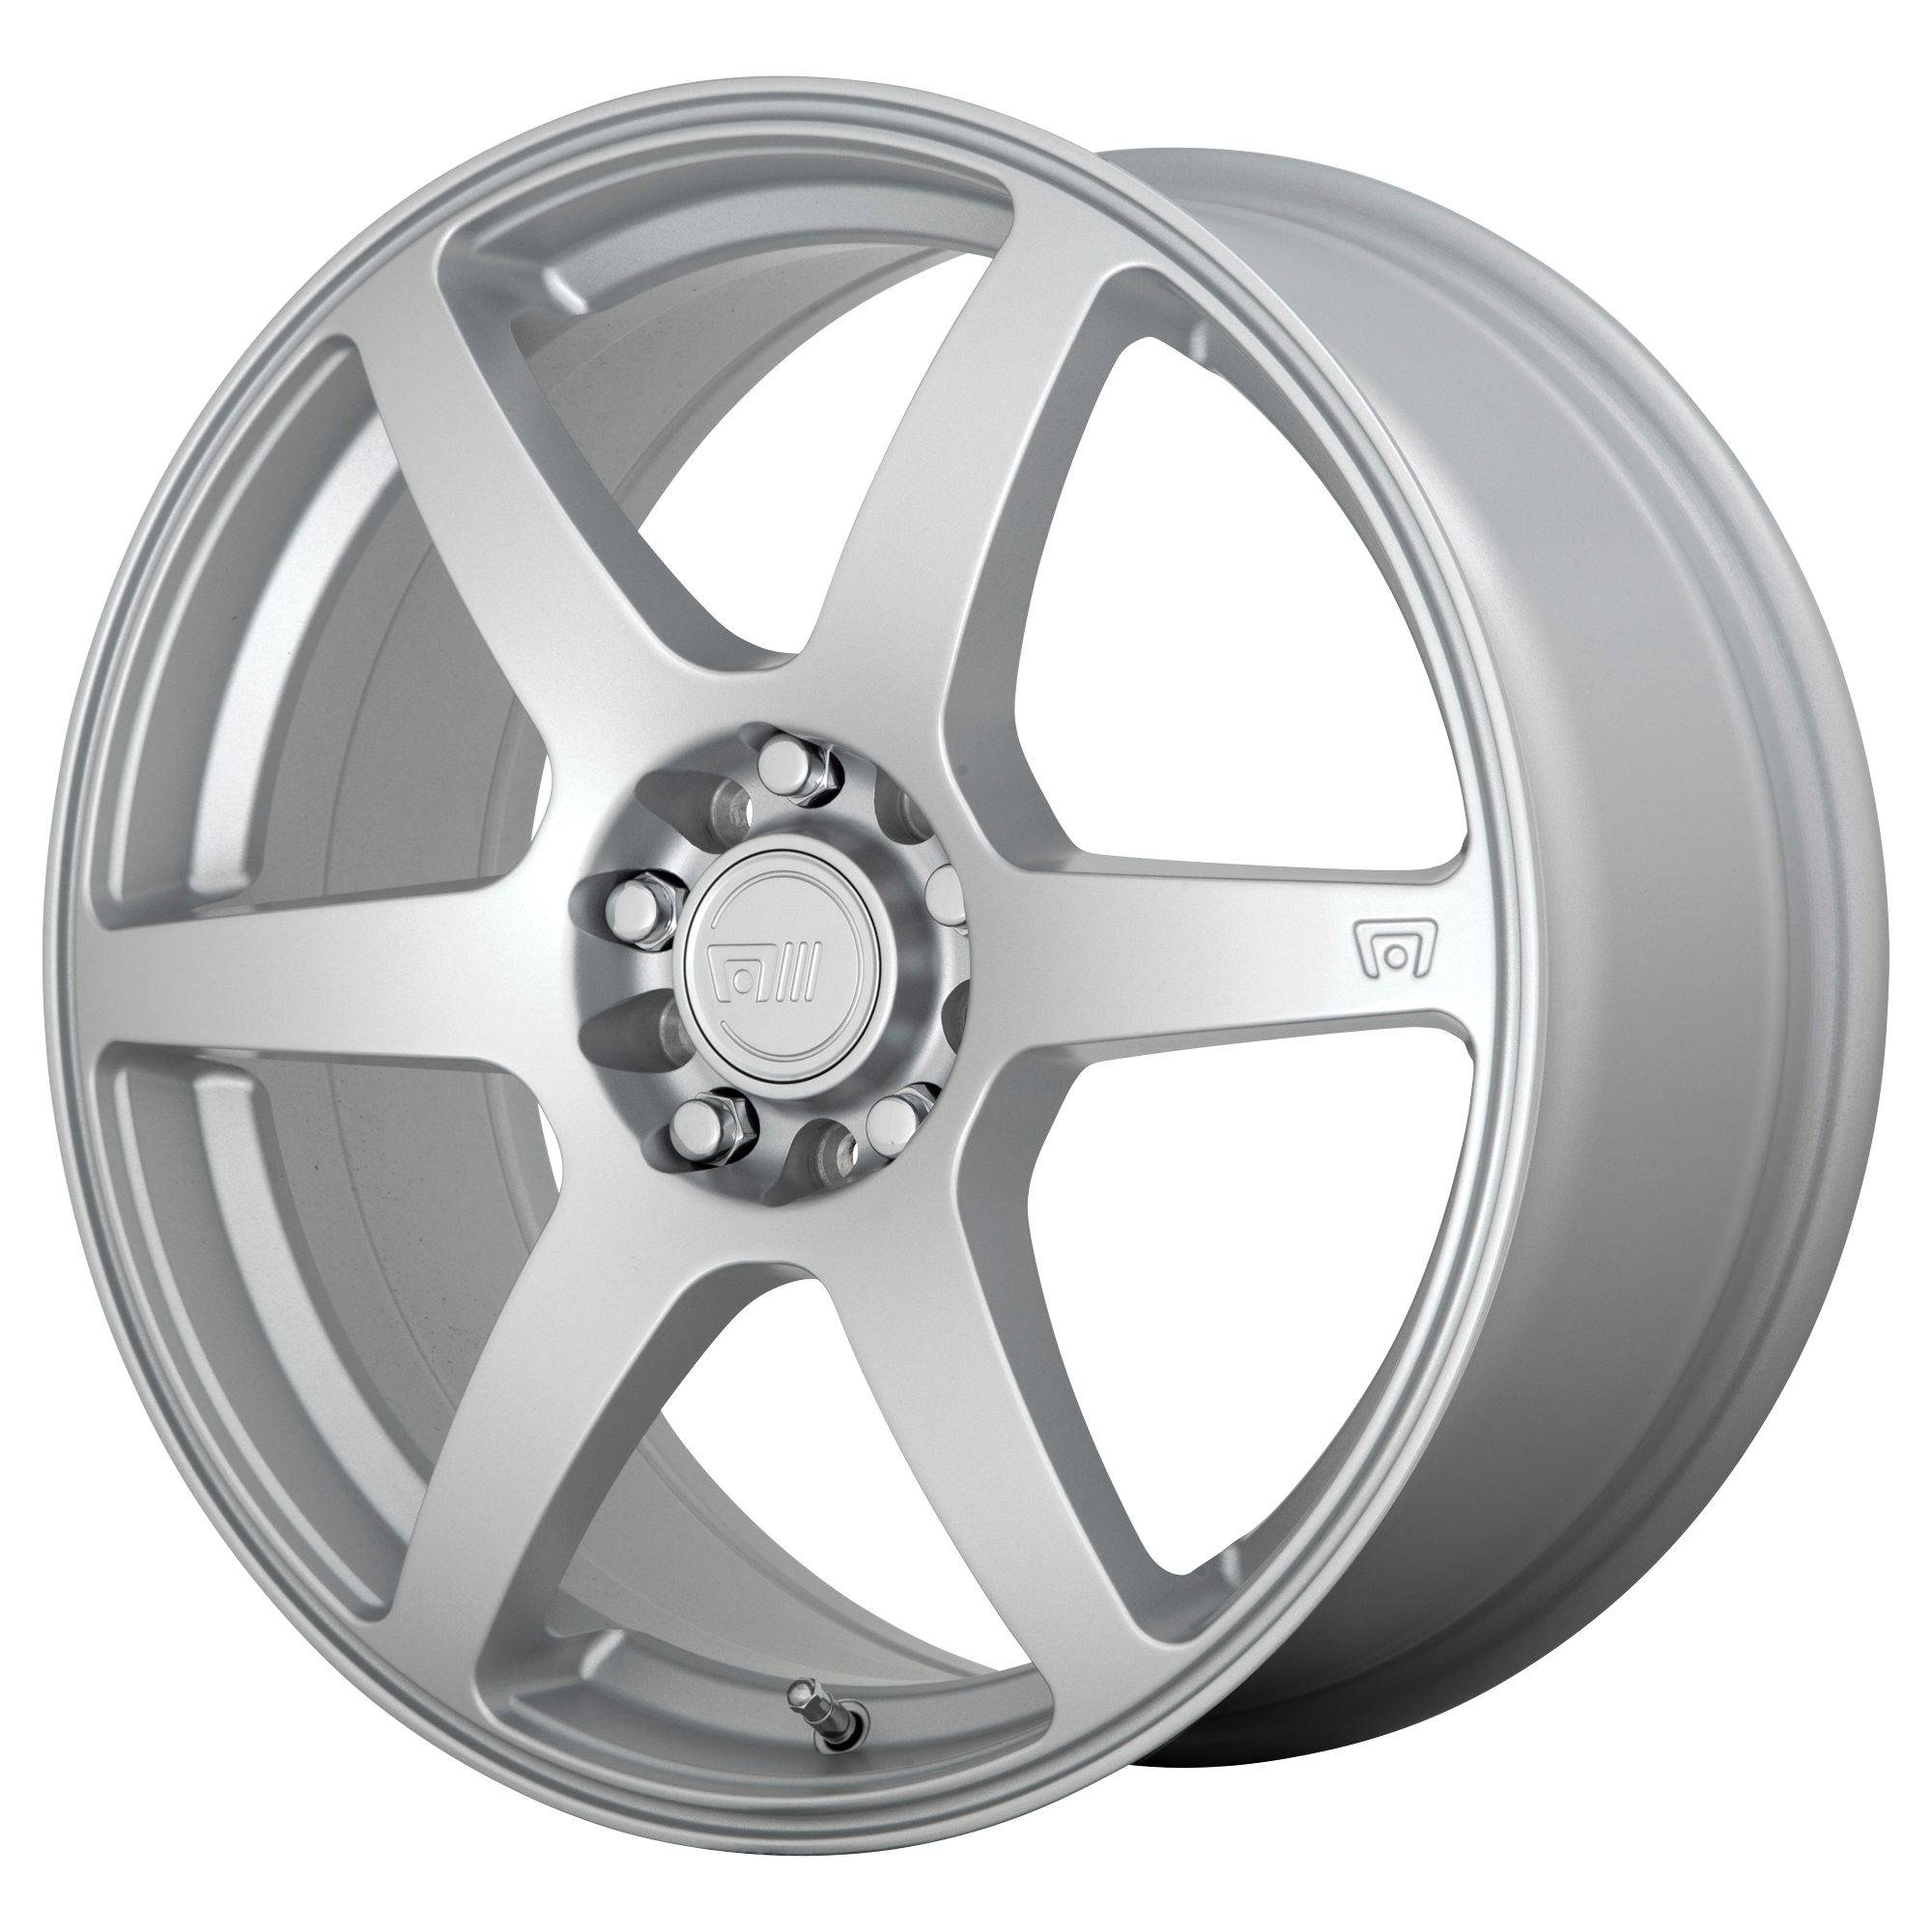 CS6 18x8 5x108.00/5x114.30 HYPER SILVER (45 mm) - Tires and Engine Performance